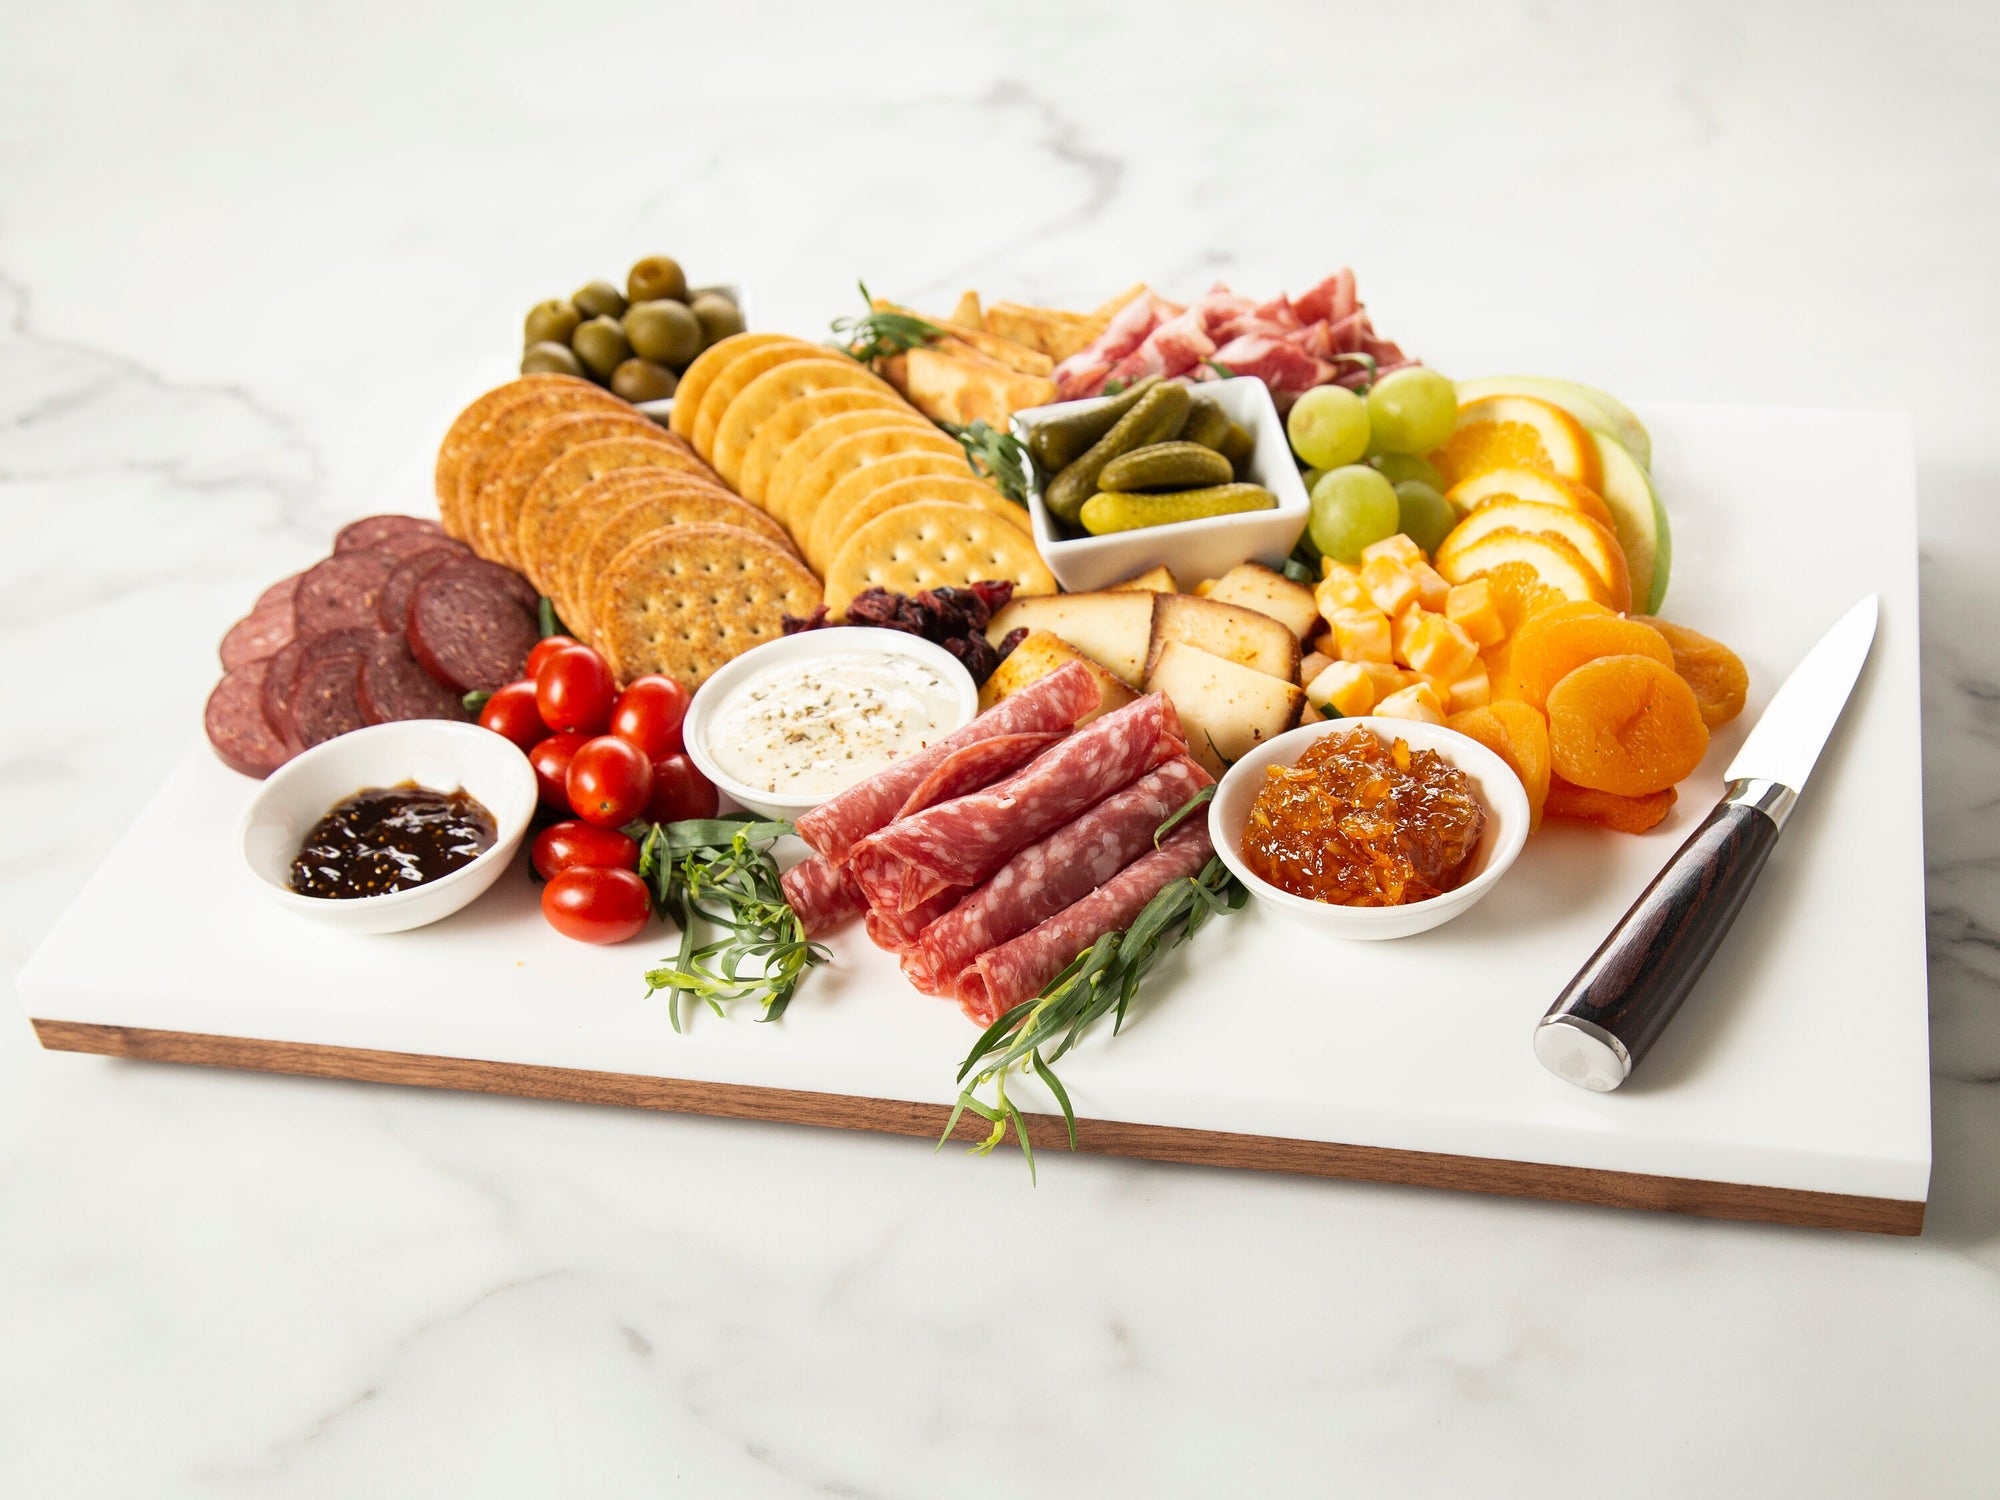 Be the talk of the party with the Black Walnut & Corian Charcuterie Board! This stunning pairing of black walnut wood and corian offers a chic, modern look, making it the perfect choice for a housewarming, wedding or any special occasion. Wow your guests with your excellent taste and make a great impression!